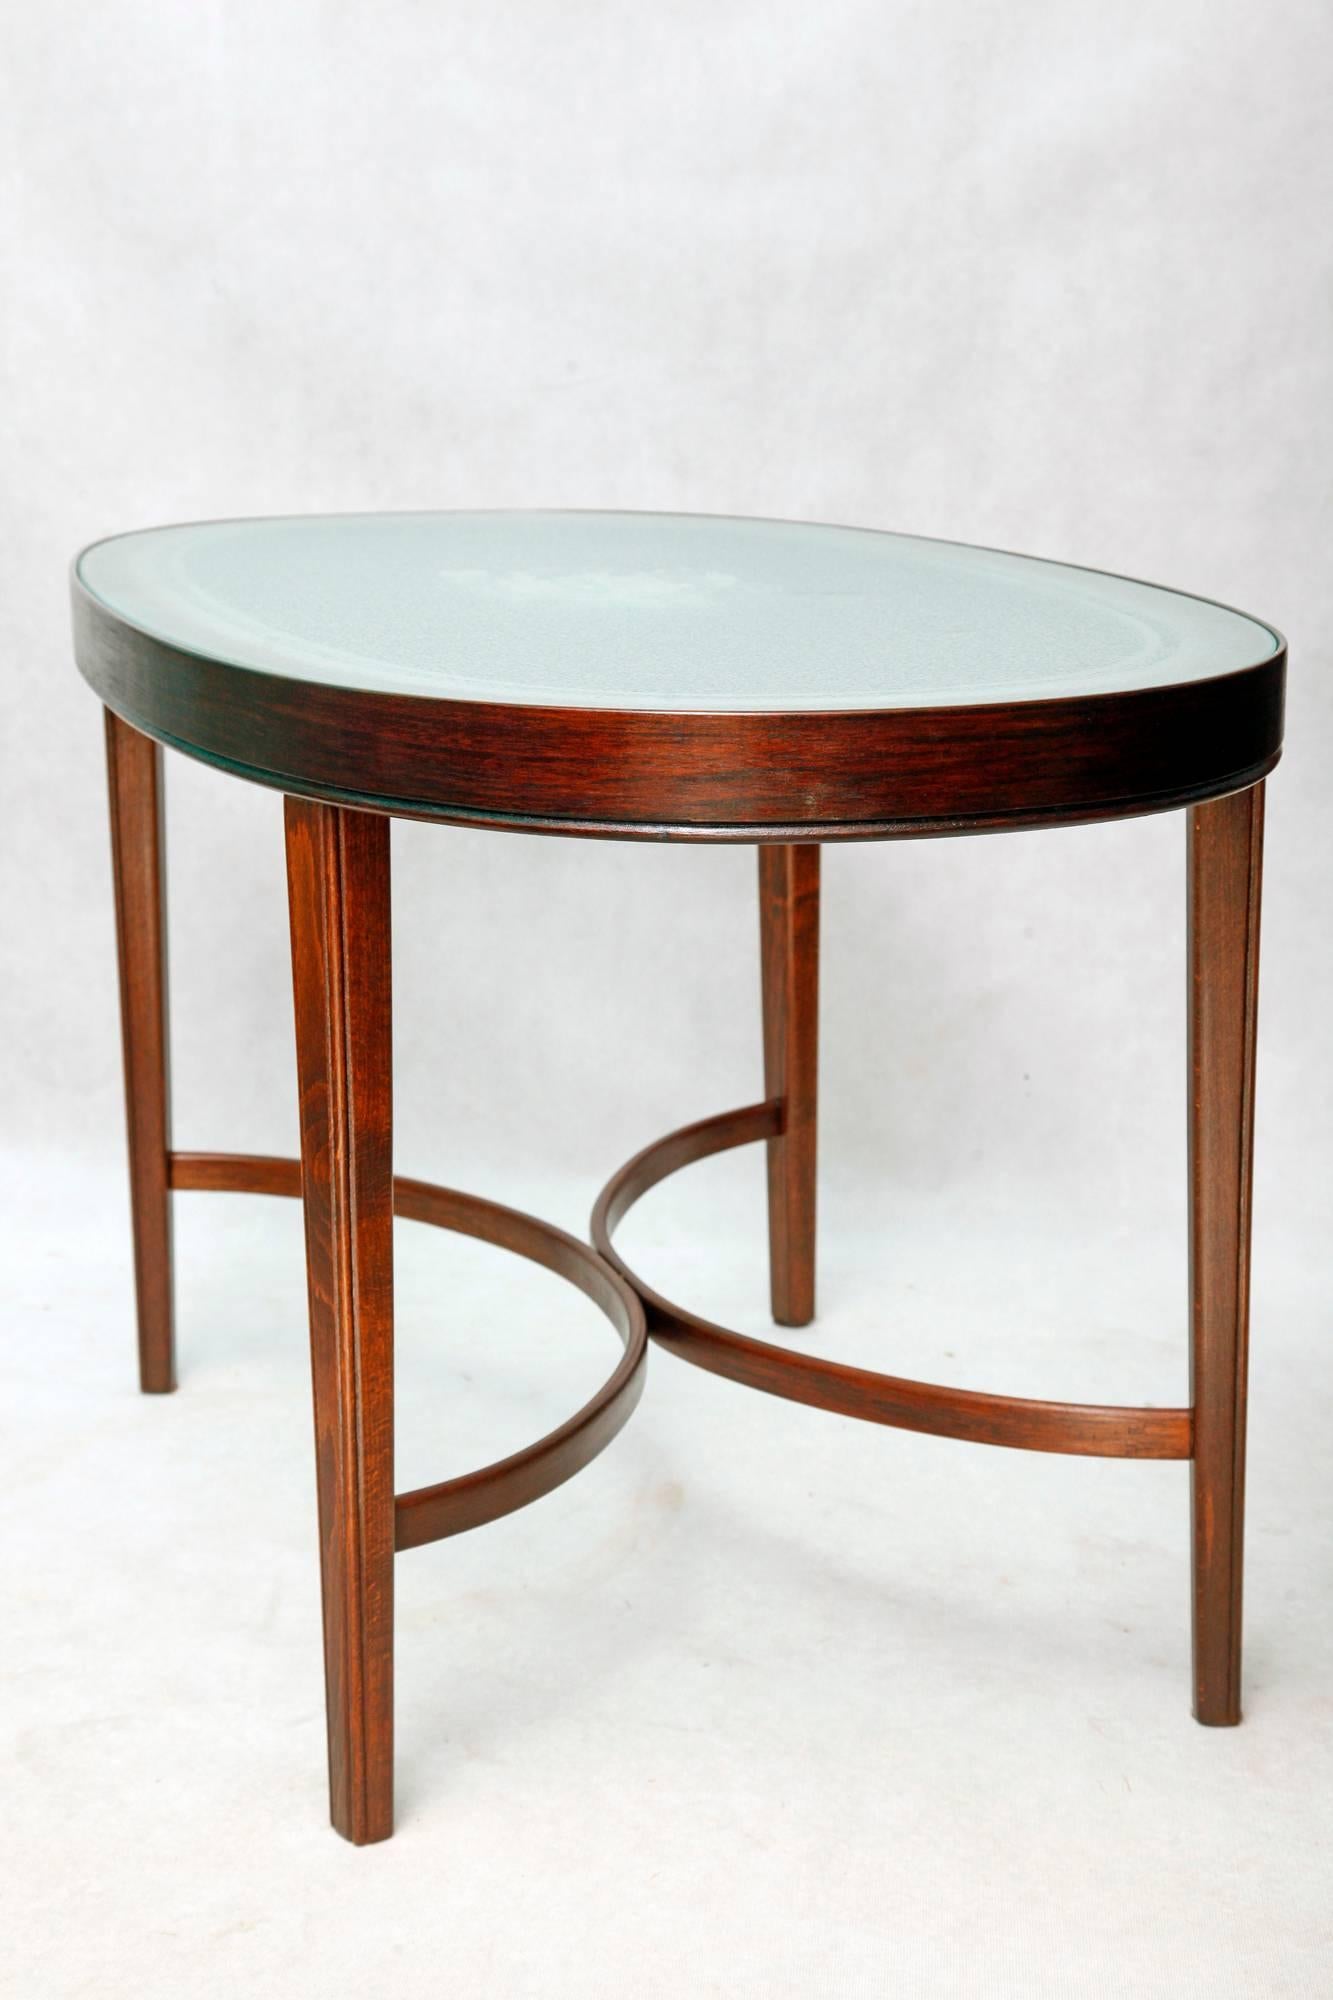 Danish Beech Coffee Table with a Glass Top, Denmark, 1940s For Sale